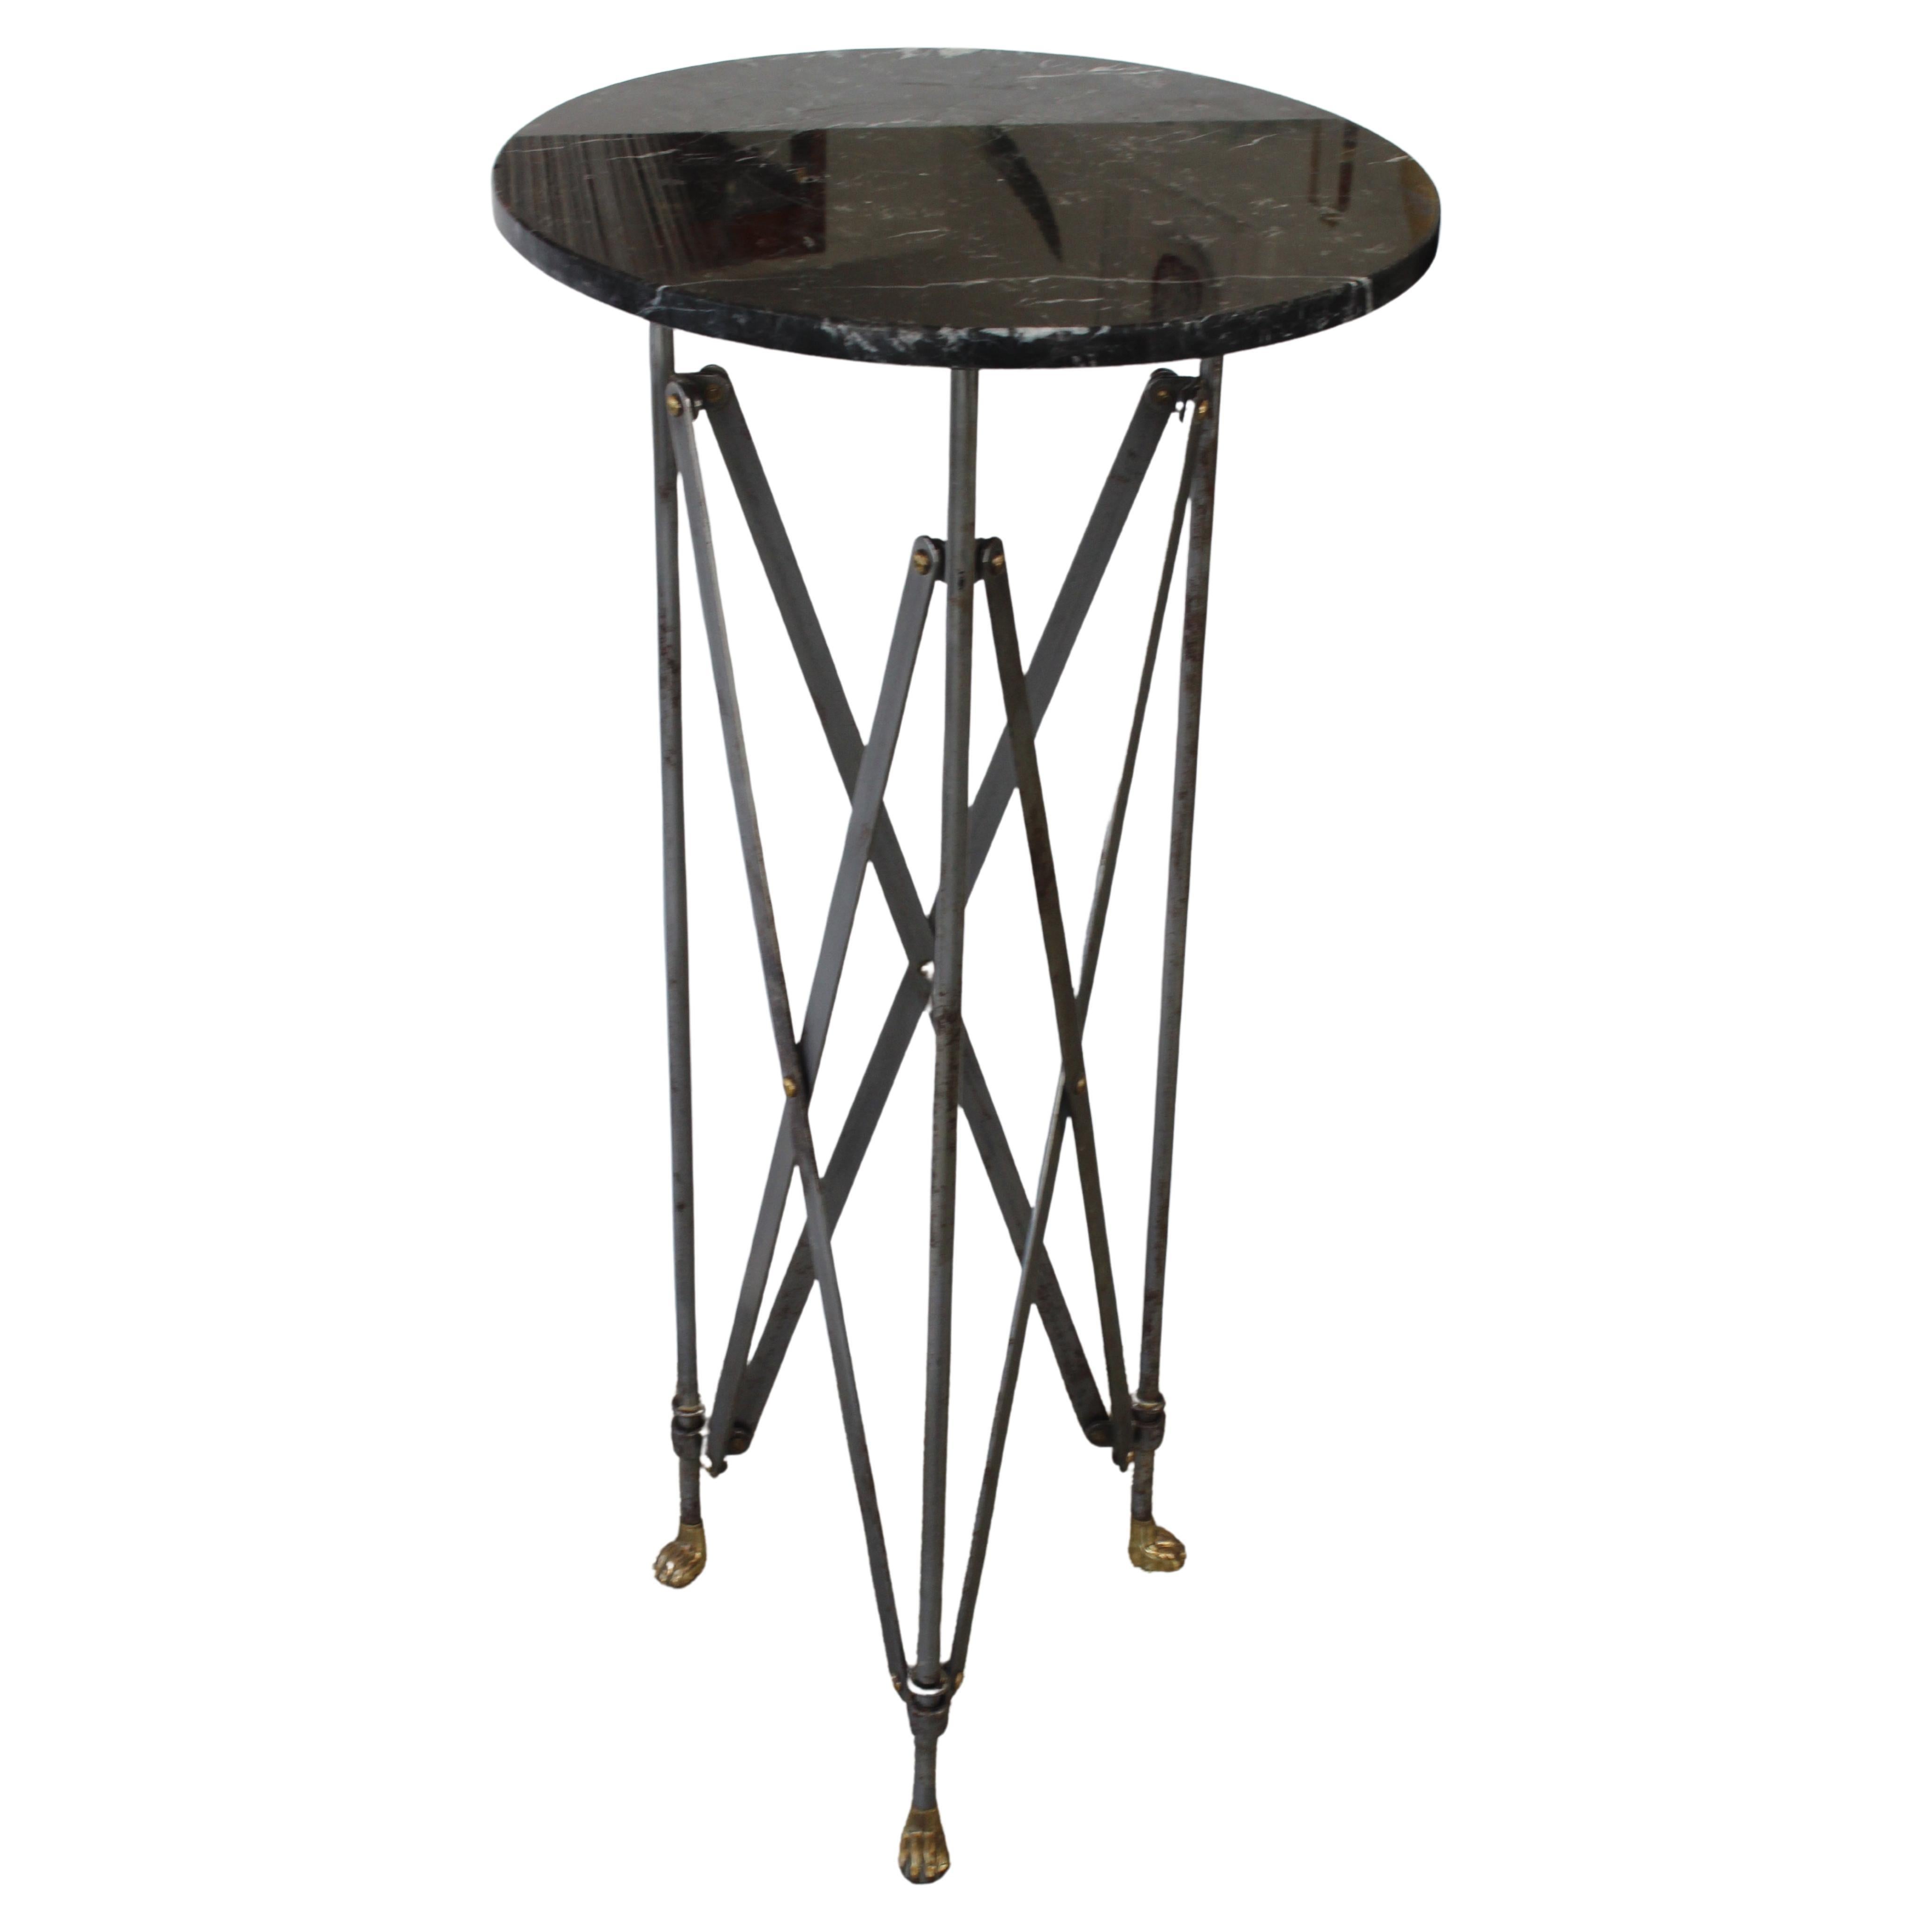 Campaign Style Pedestal with Marble Top For Sale